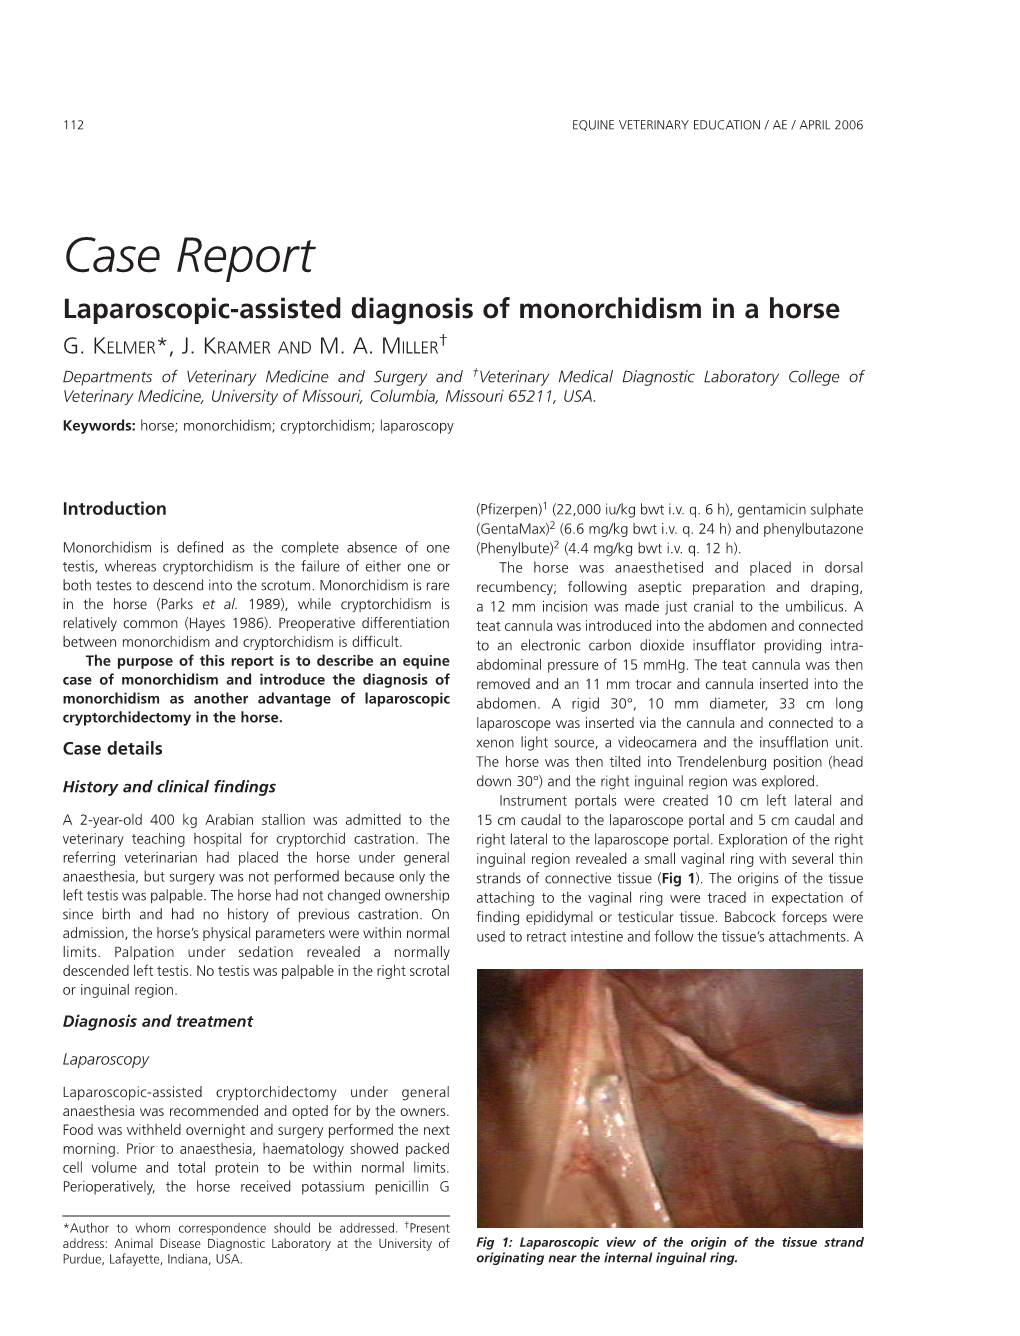 Case Report Laparoscopic-Assisted Diagnosis of Monorchidism in a Horse G